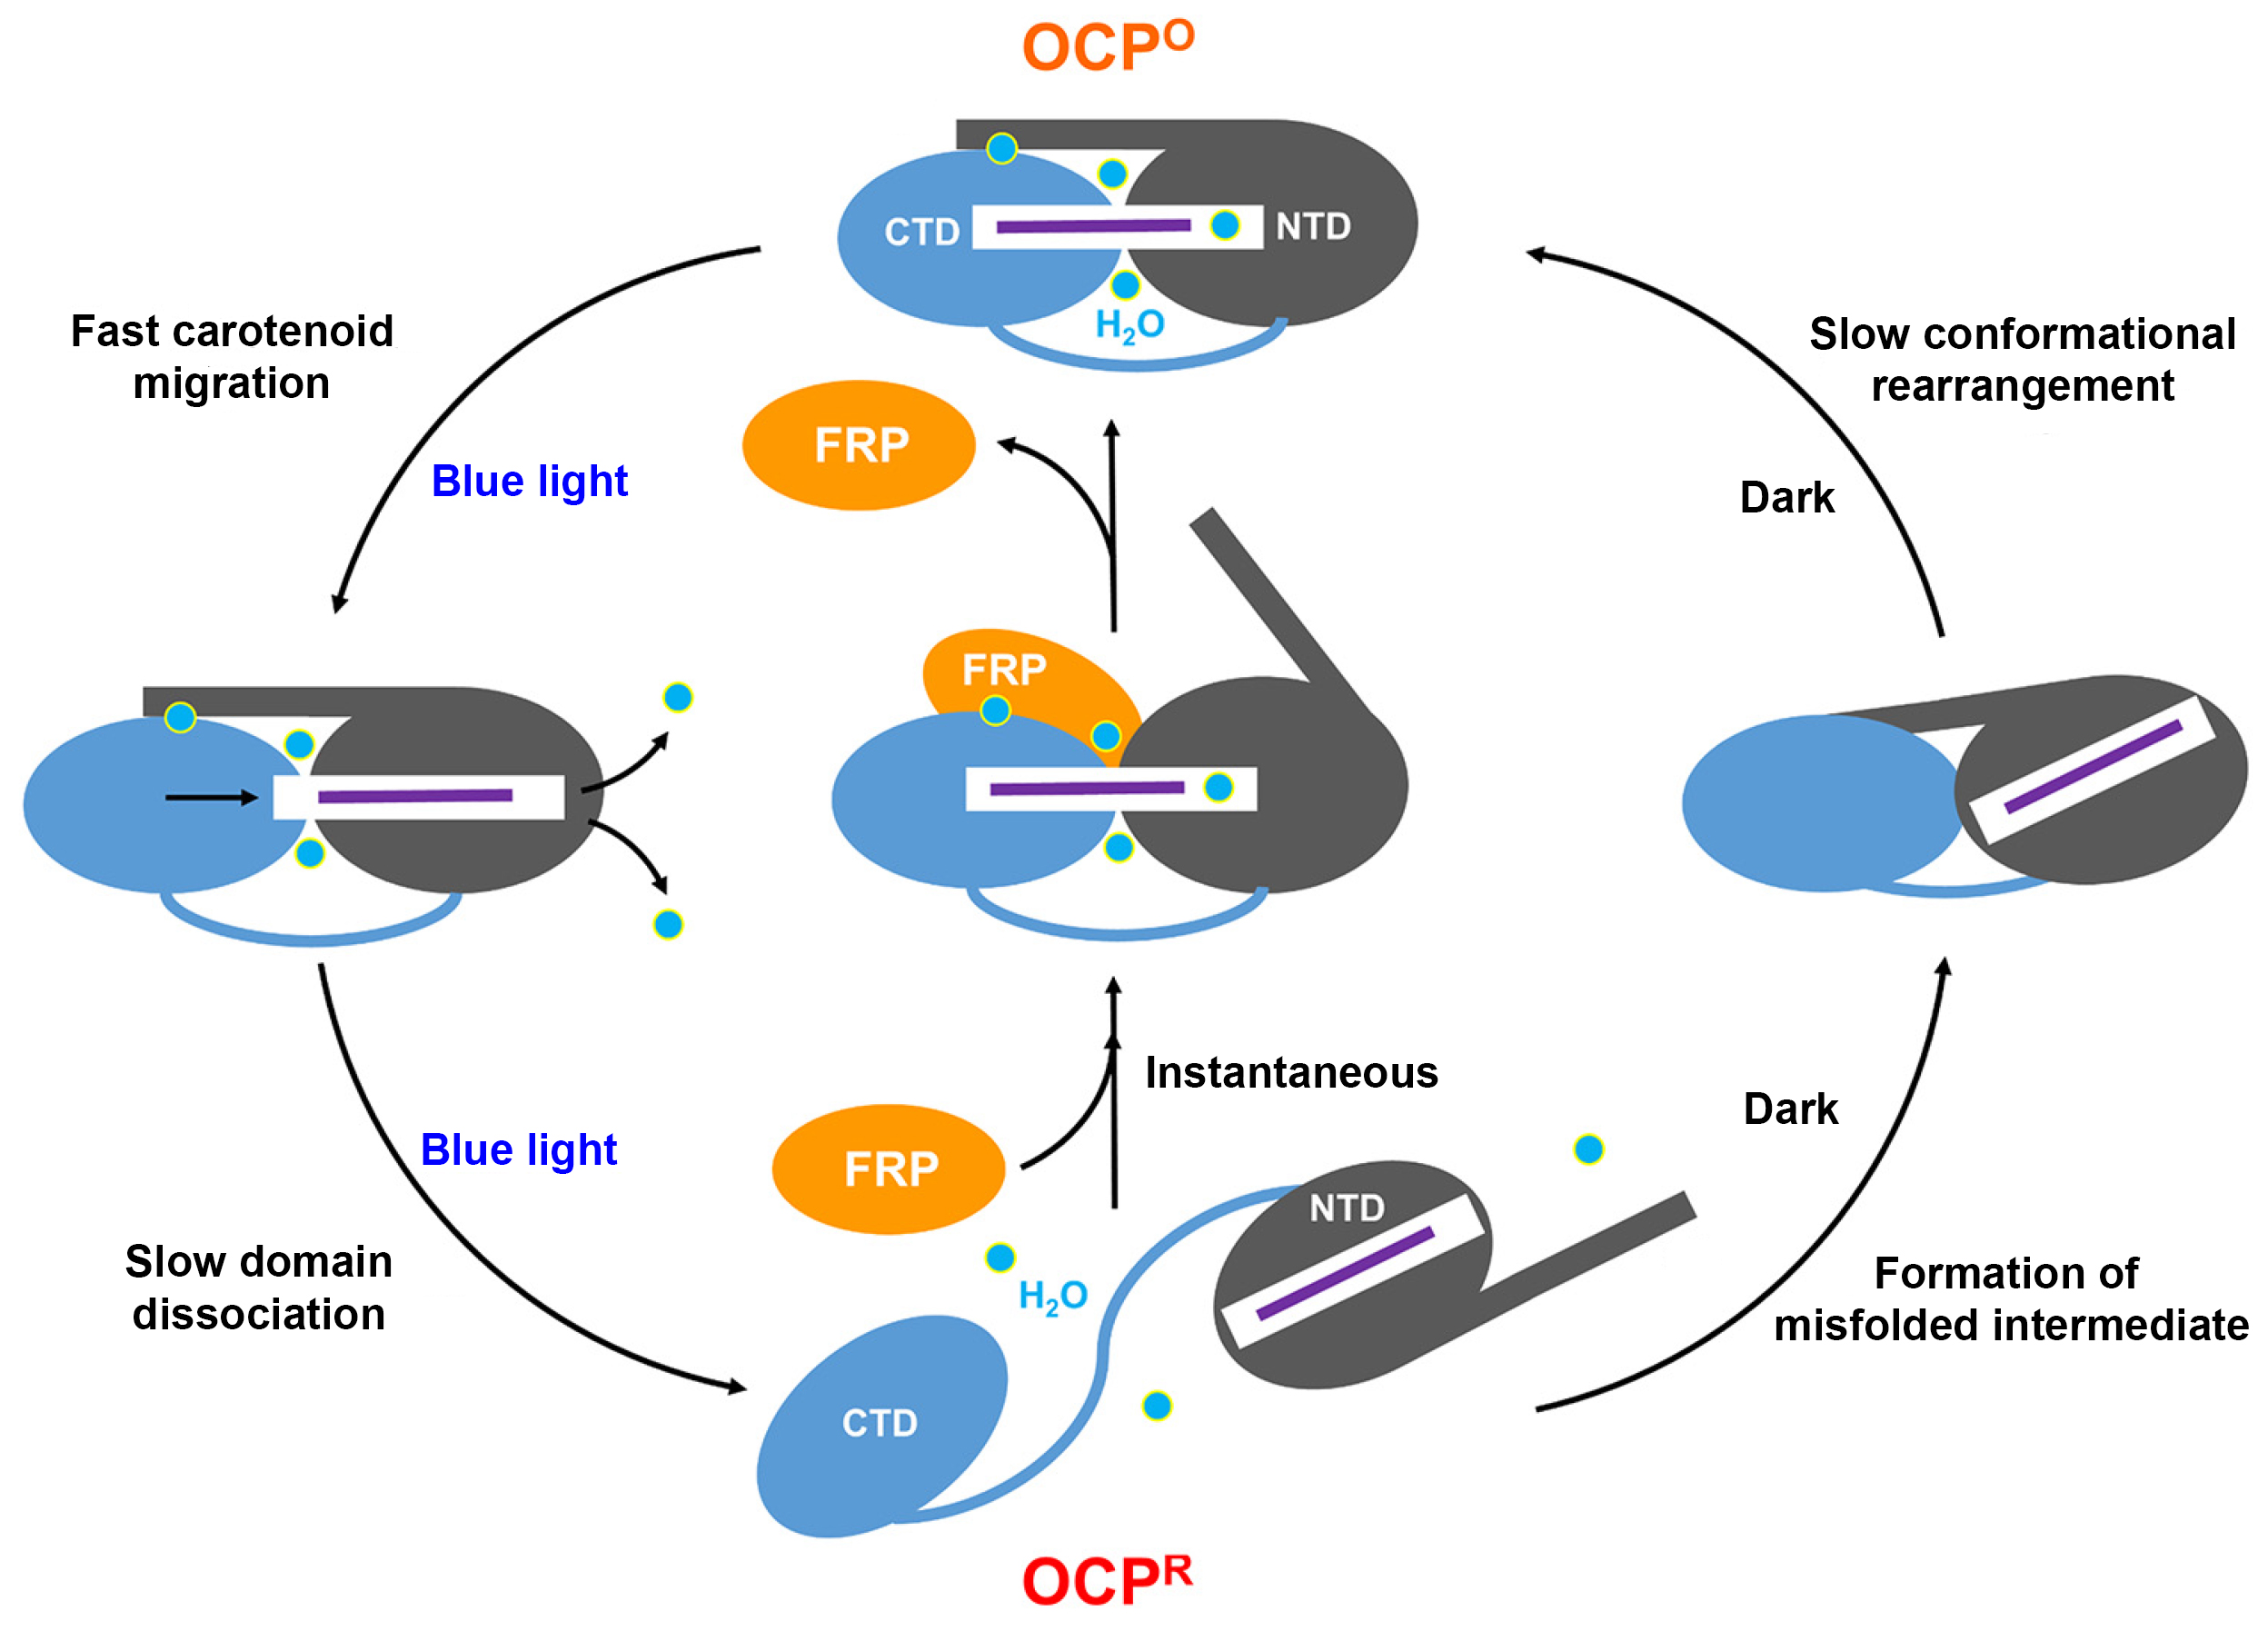 Cyclic flow chart showing OCP activation and relaxation process.